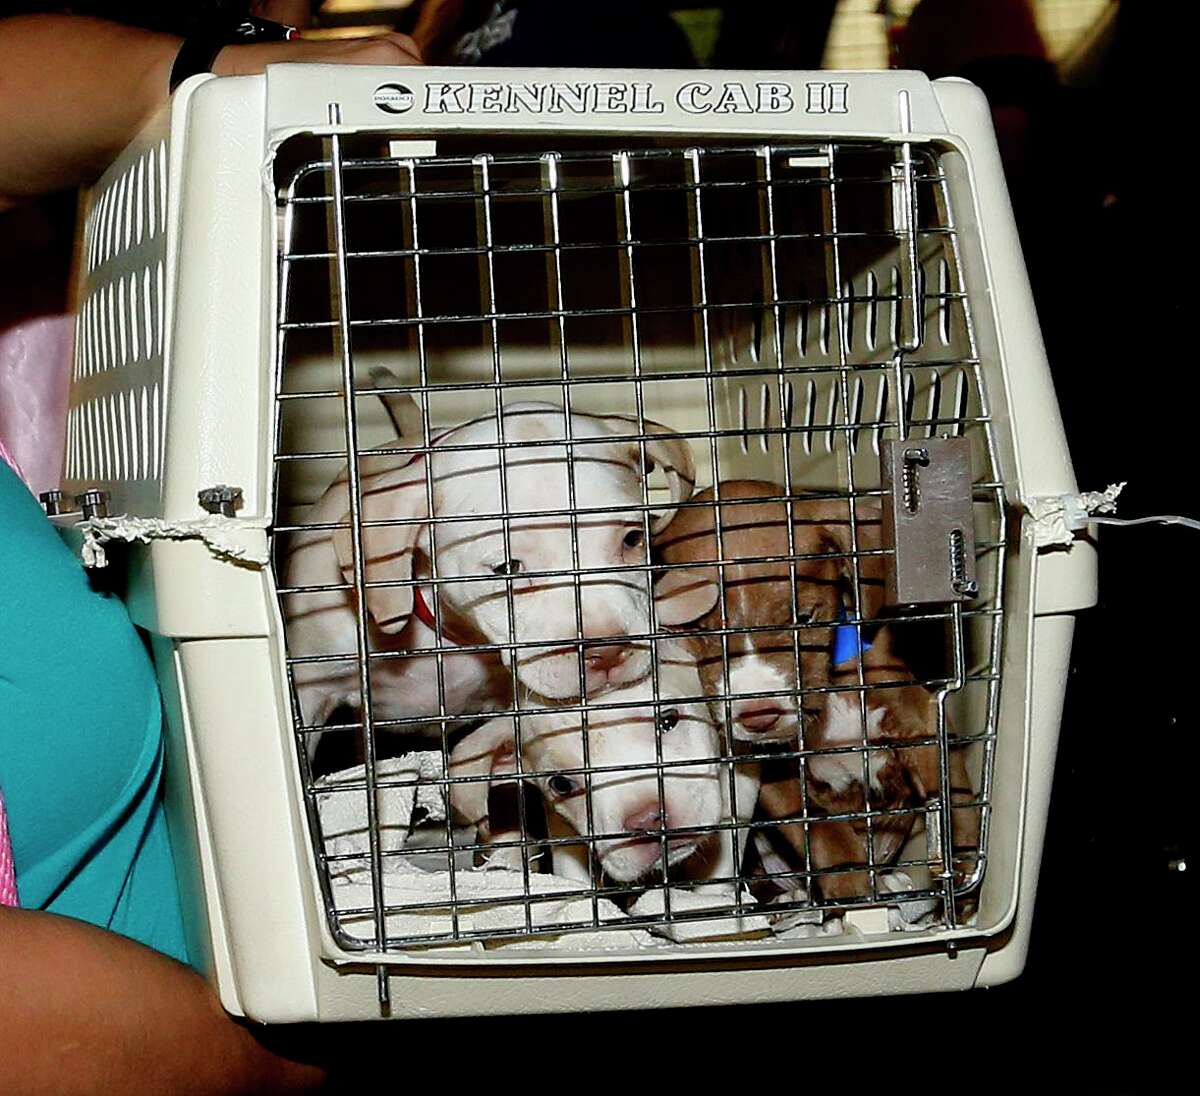 Shelter takes in 100-plus cats and dogs displaced by Hurricane Ian